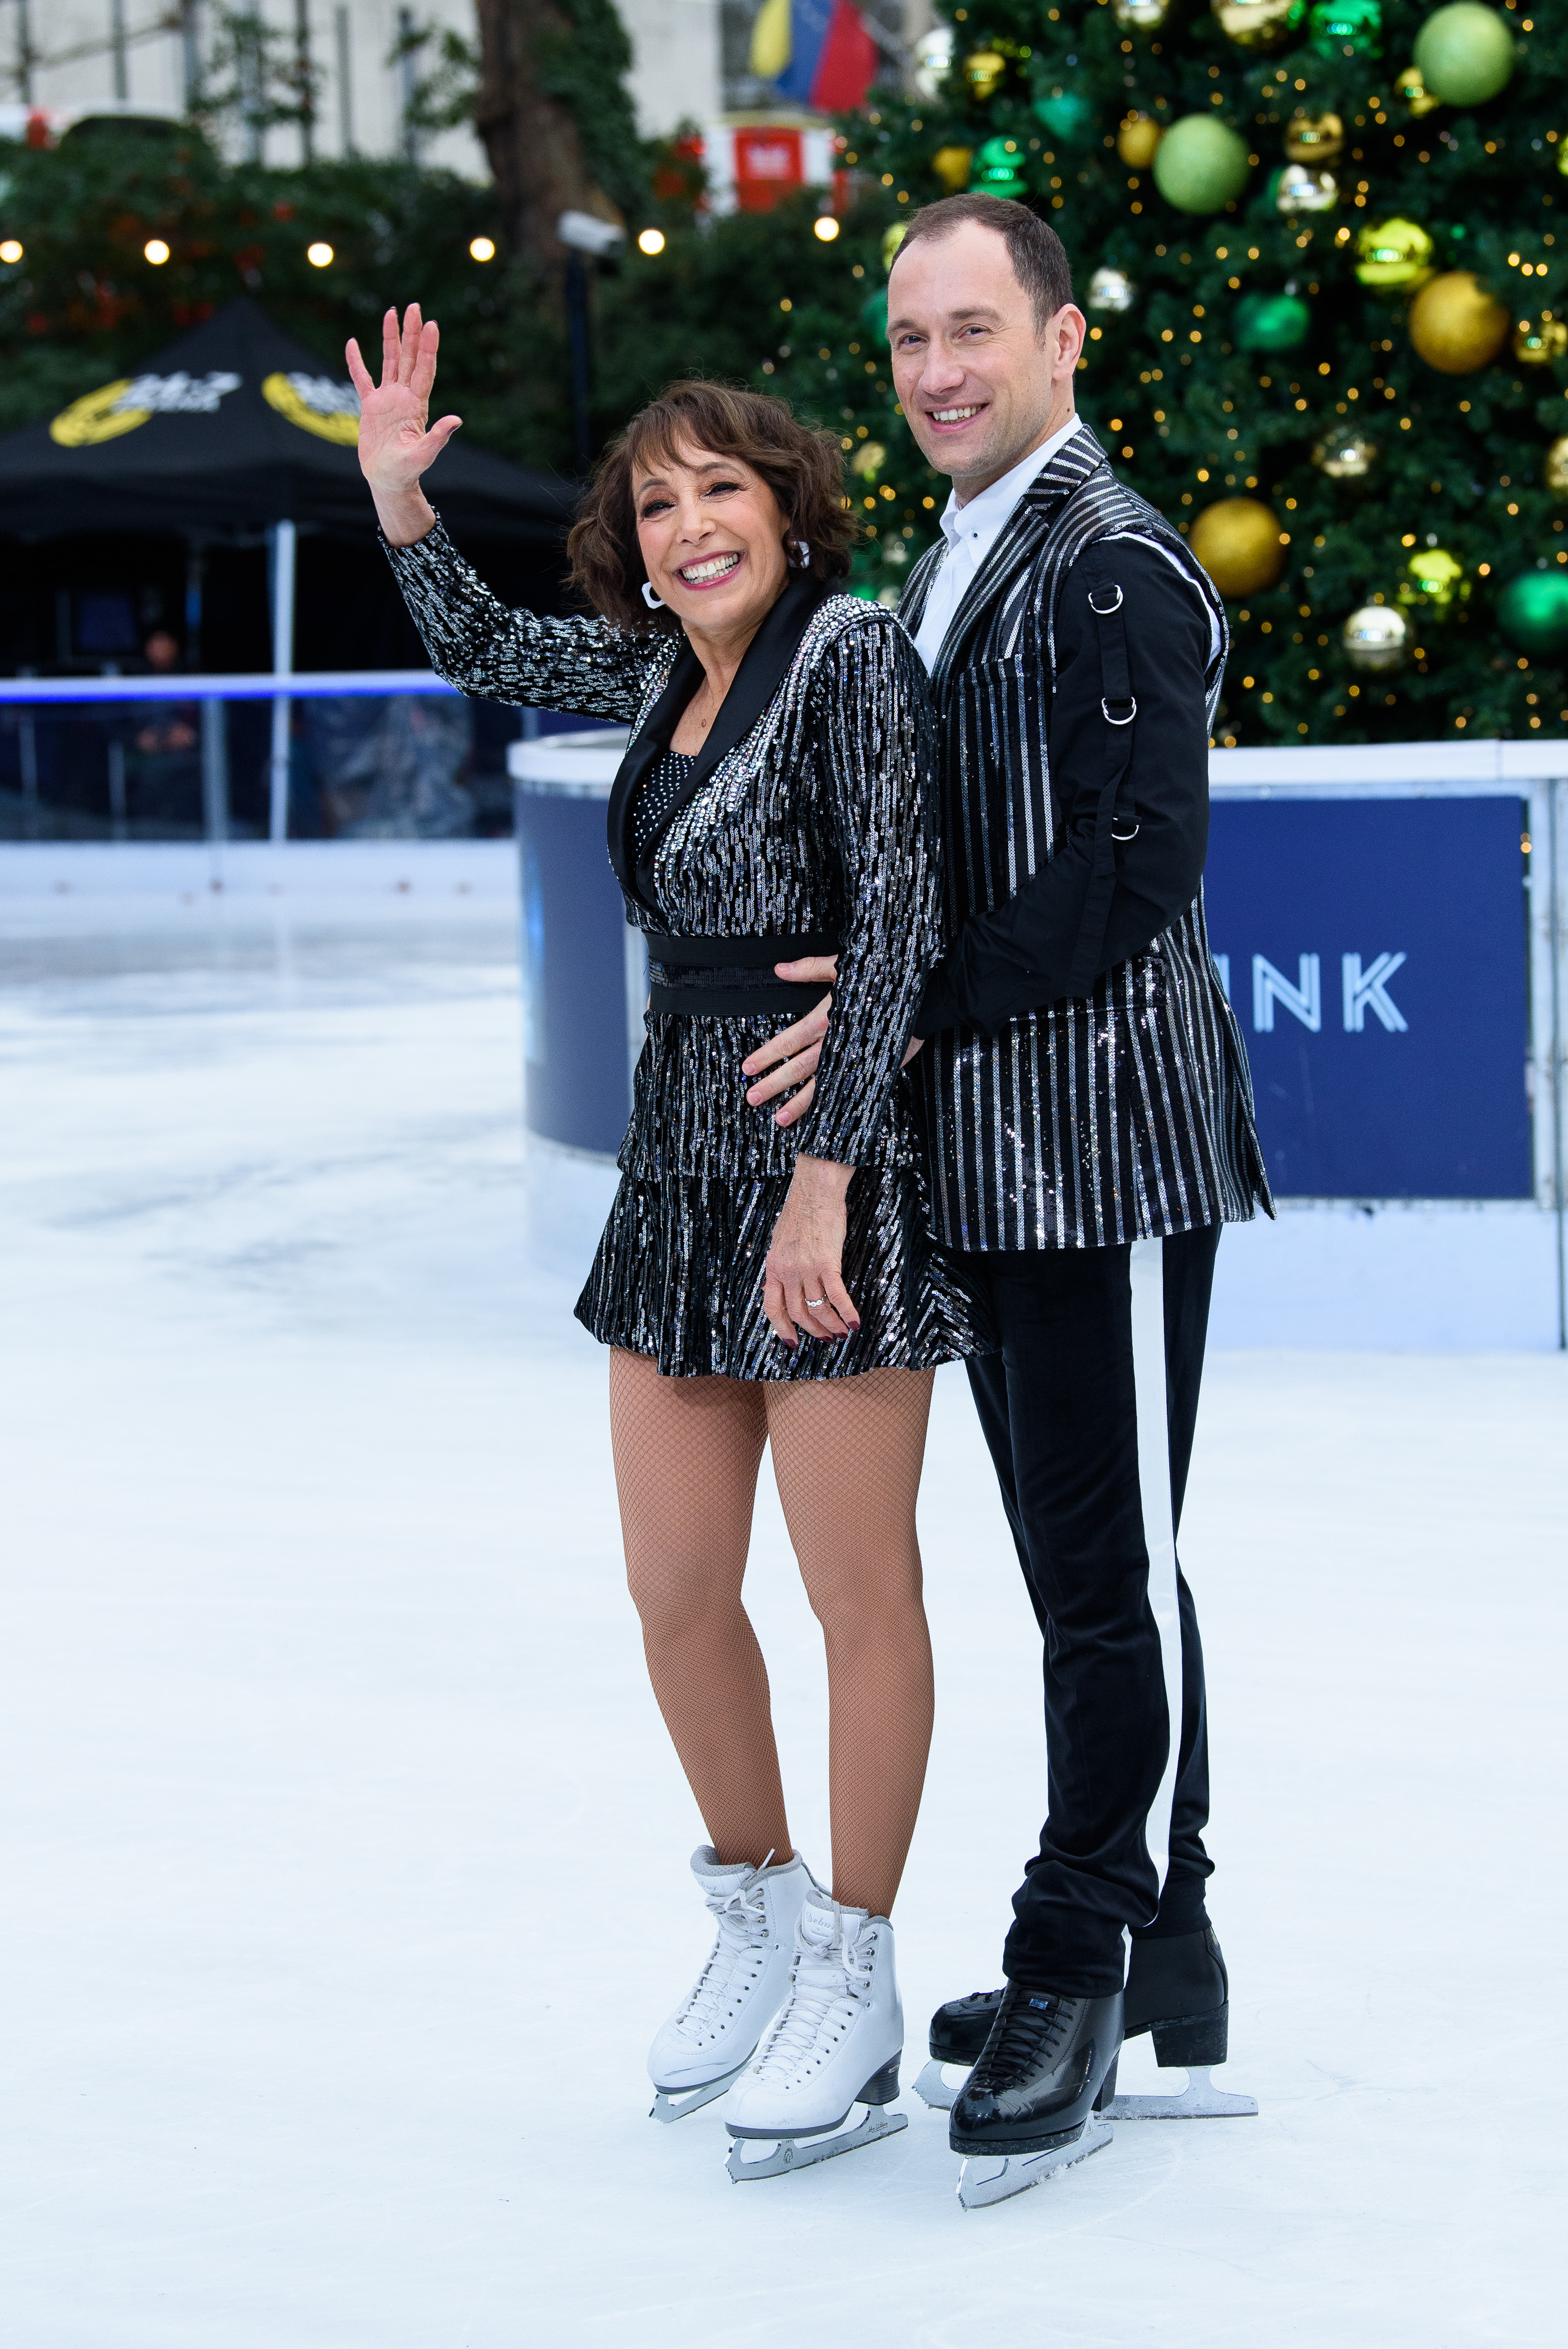 Didi Conn and Lukasz Rozycki during a photocall for "Dancing On Ice" at Natural History Museum Ice Rink on December 18, 2018 in London, England. | Source: Getty Images